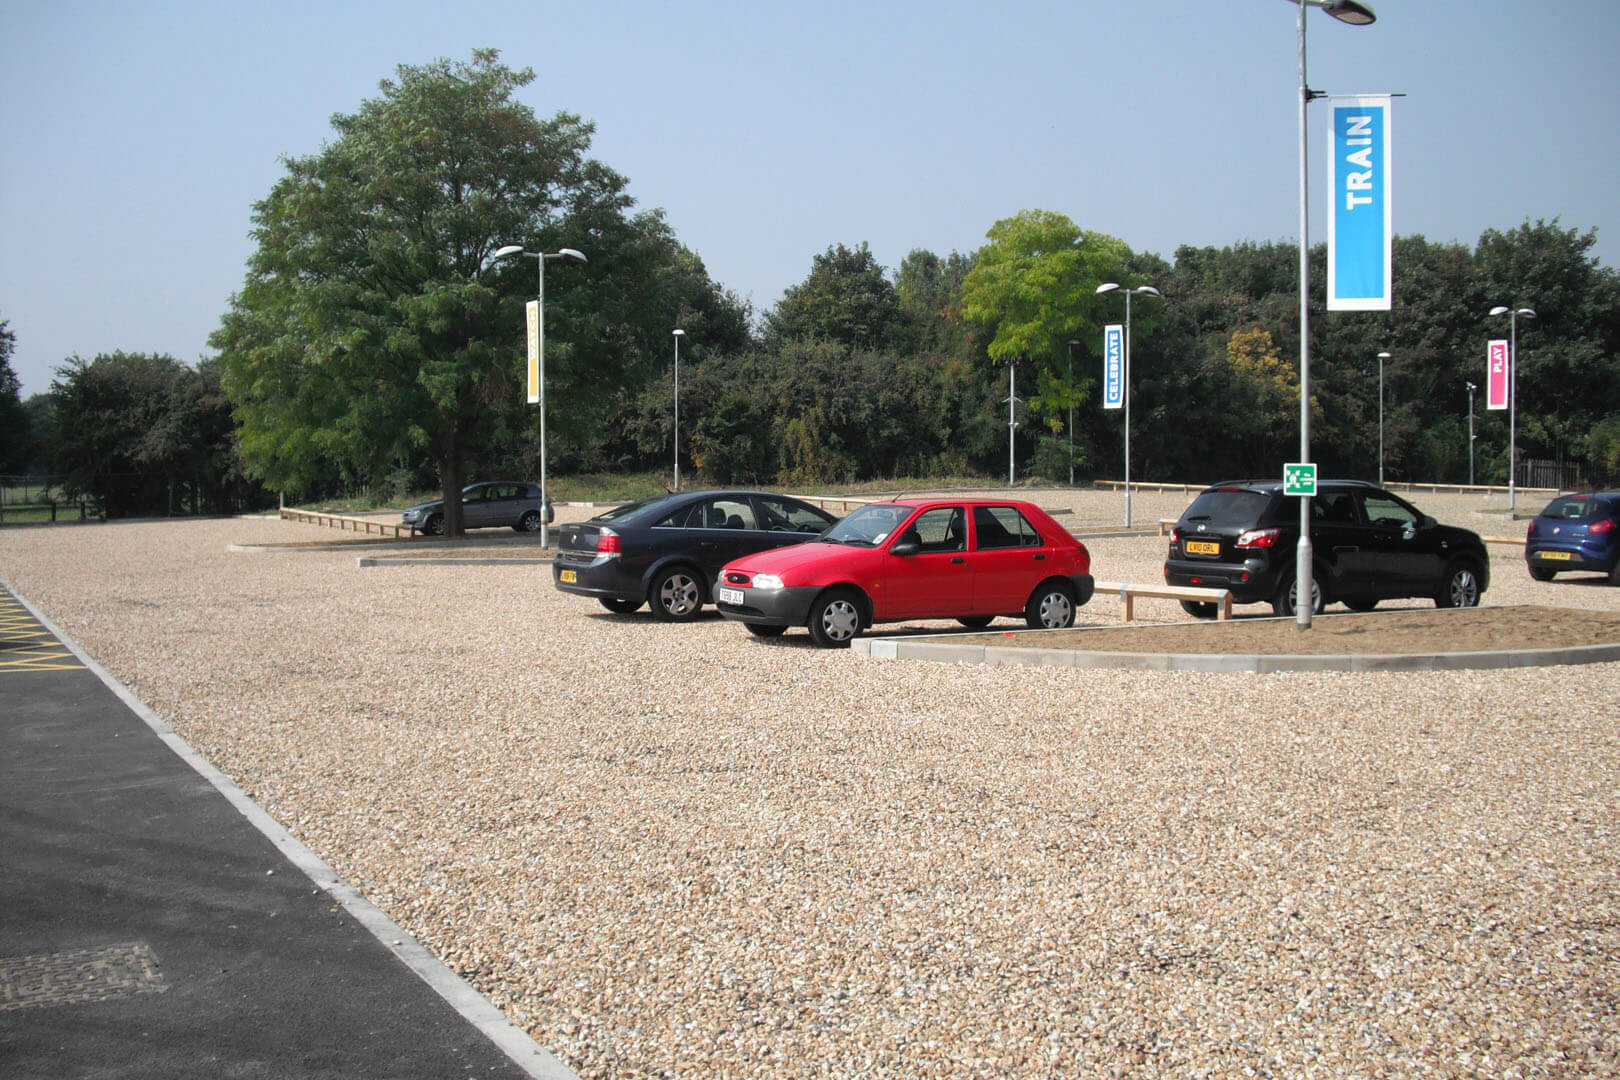 Gravel driveway with cars